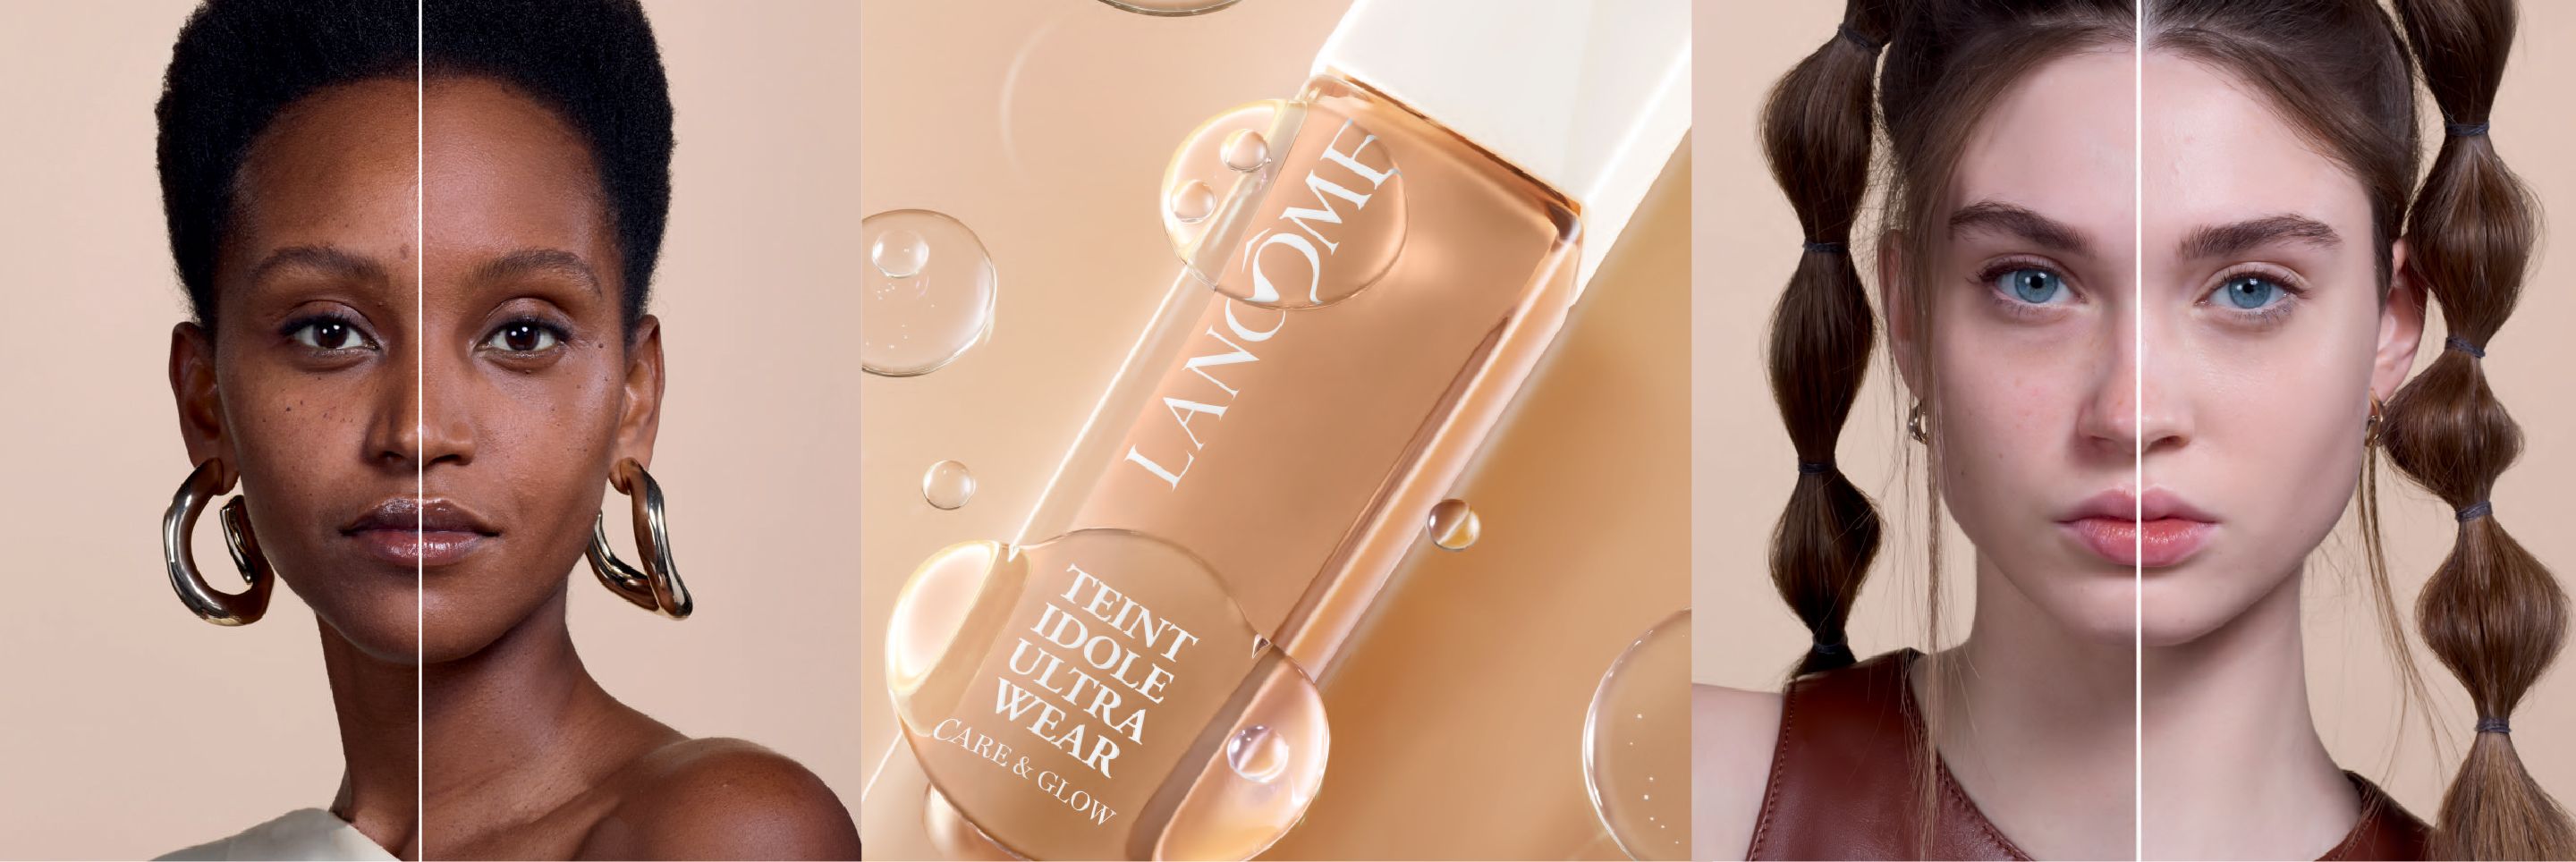 L'Oréal packaging featuring two women and Lancôme Ultra Wear